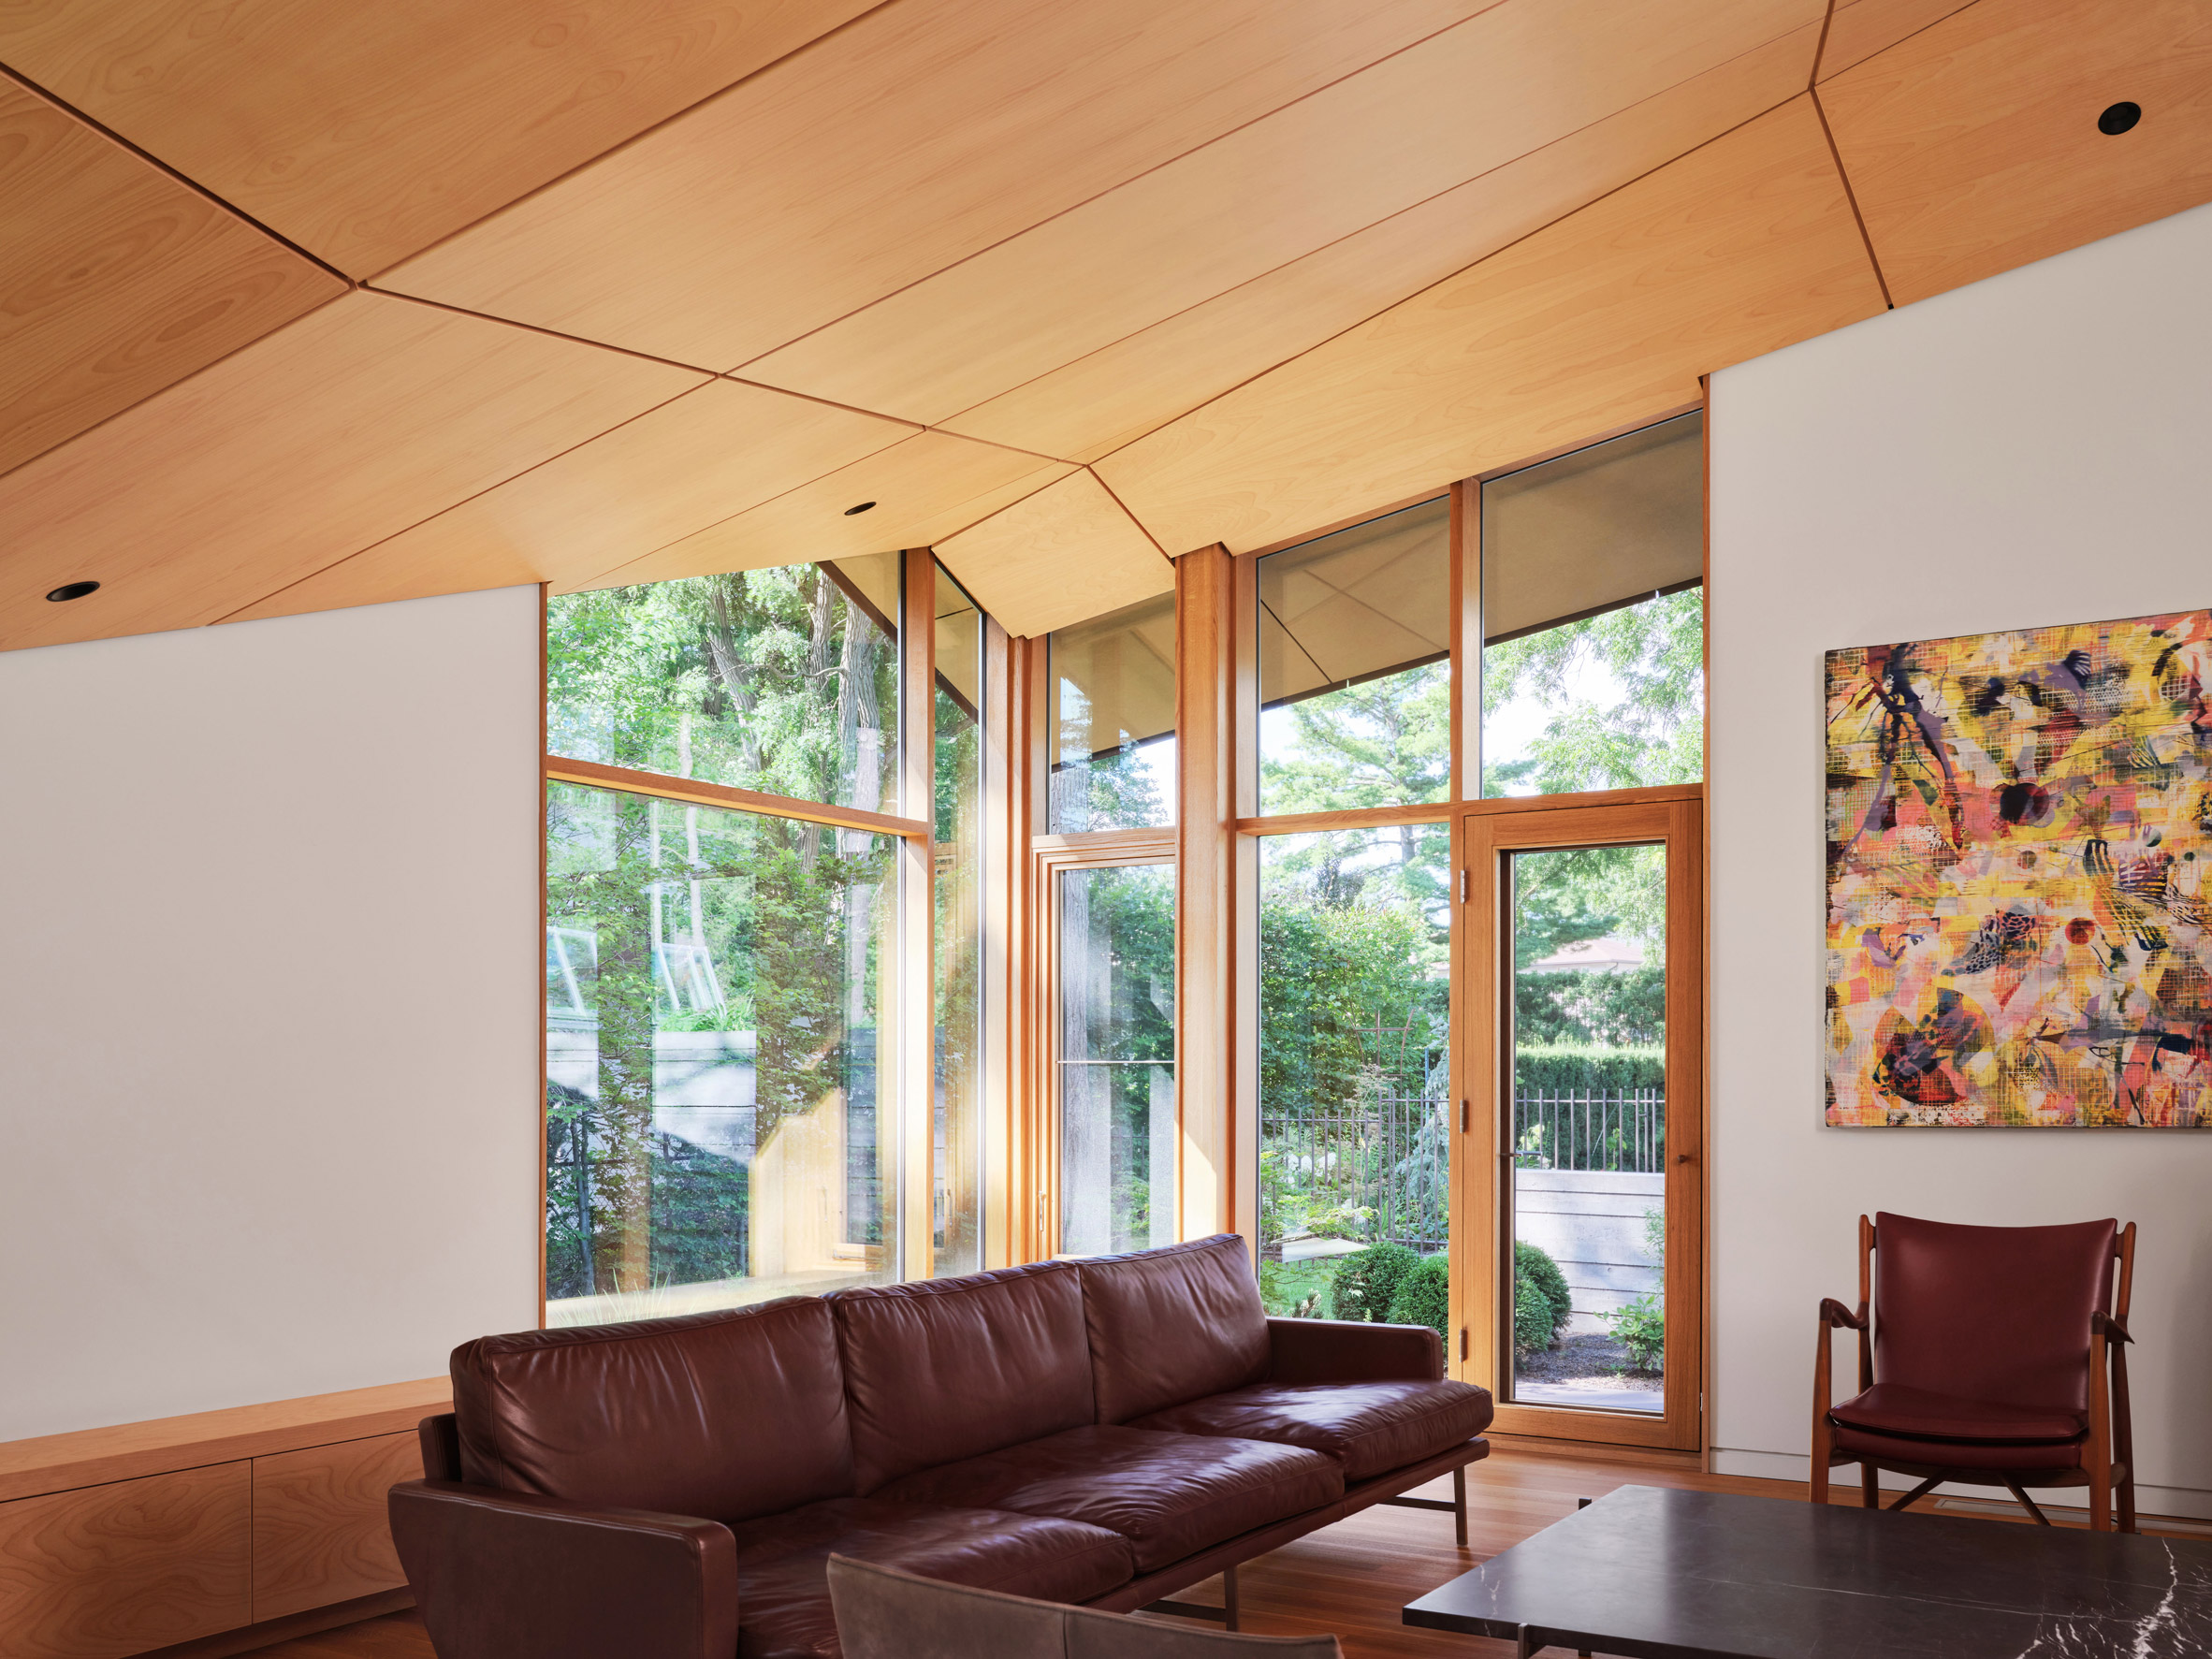 Living room with sloped wooden ceiling